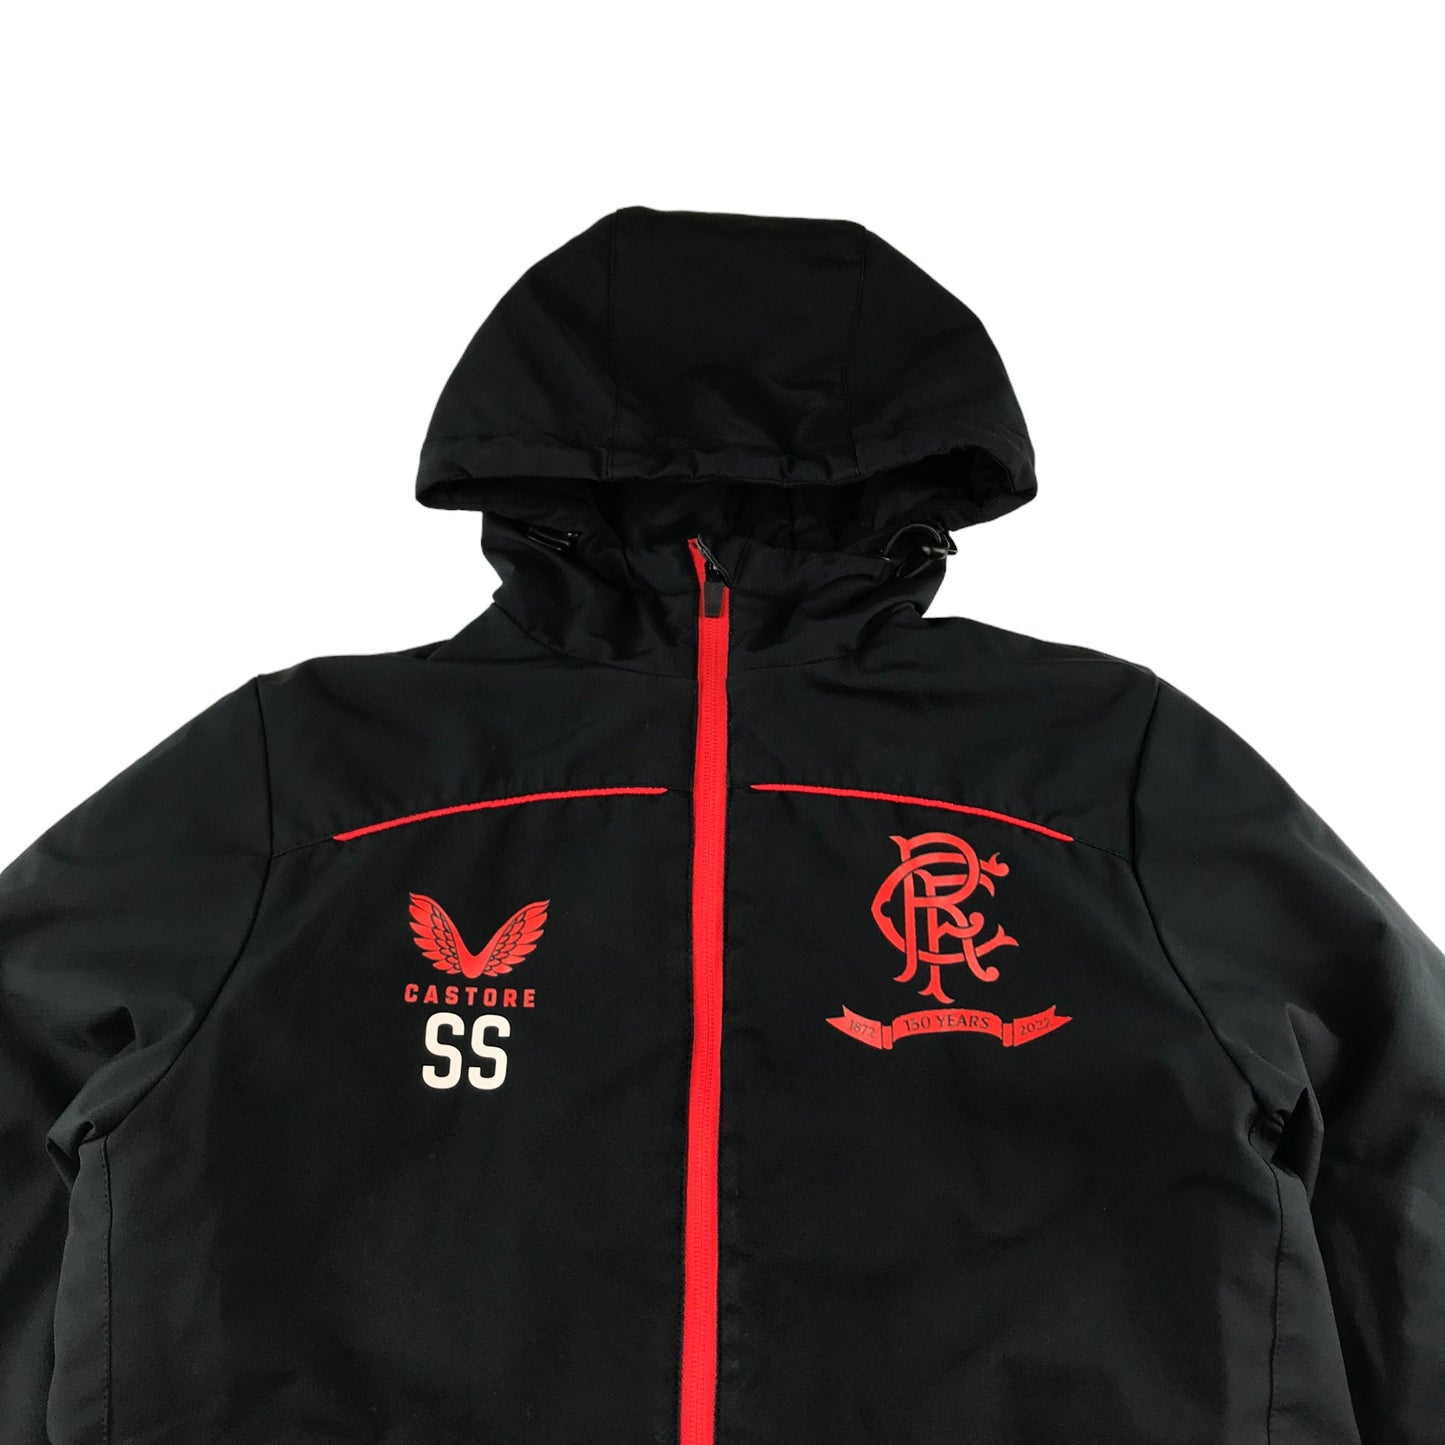 Castore Rangers FC Jacket Age 13 Black and Red Long Warm Lined